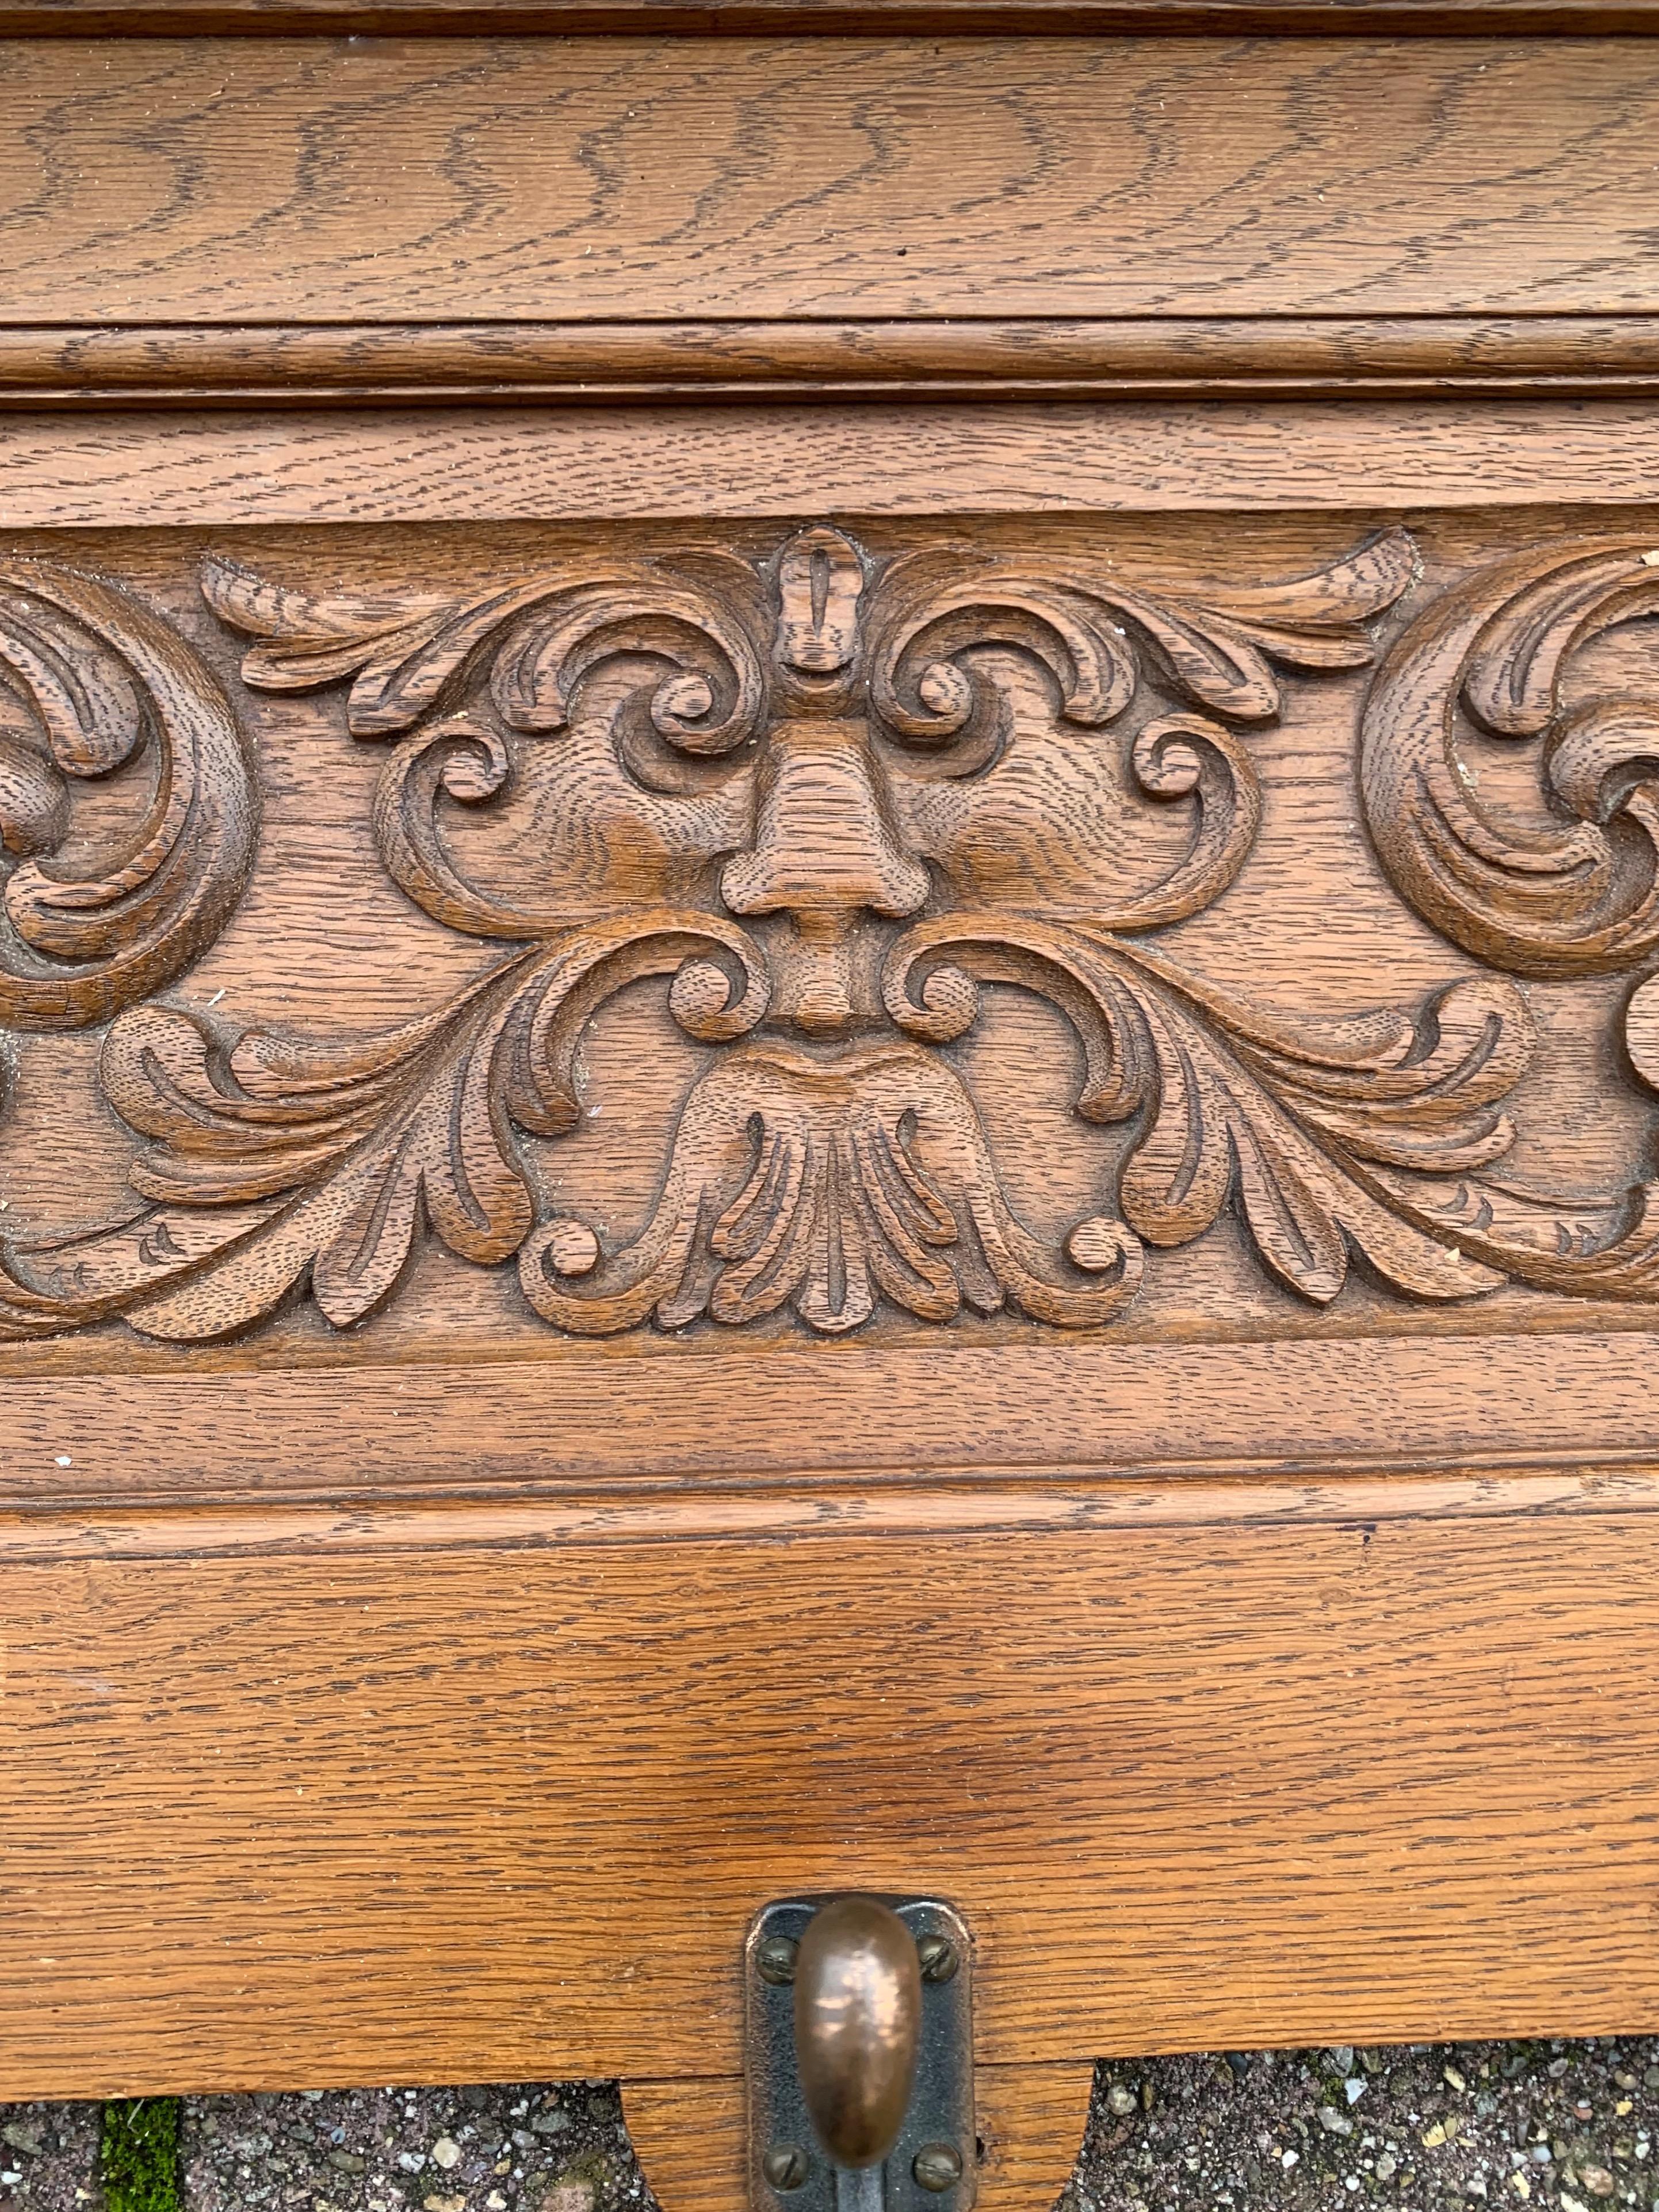 20th Century Early 1900s Renaissance Revival Wall Coat Rack with Masks & Green Man Sculpture